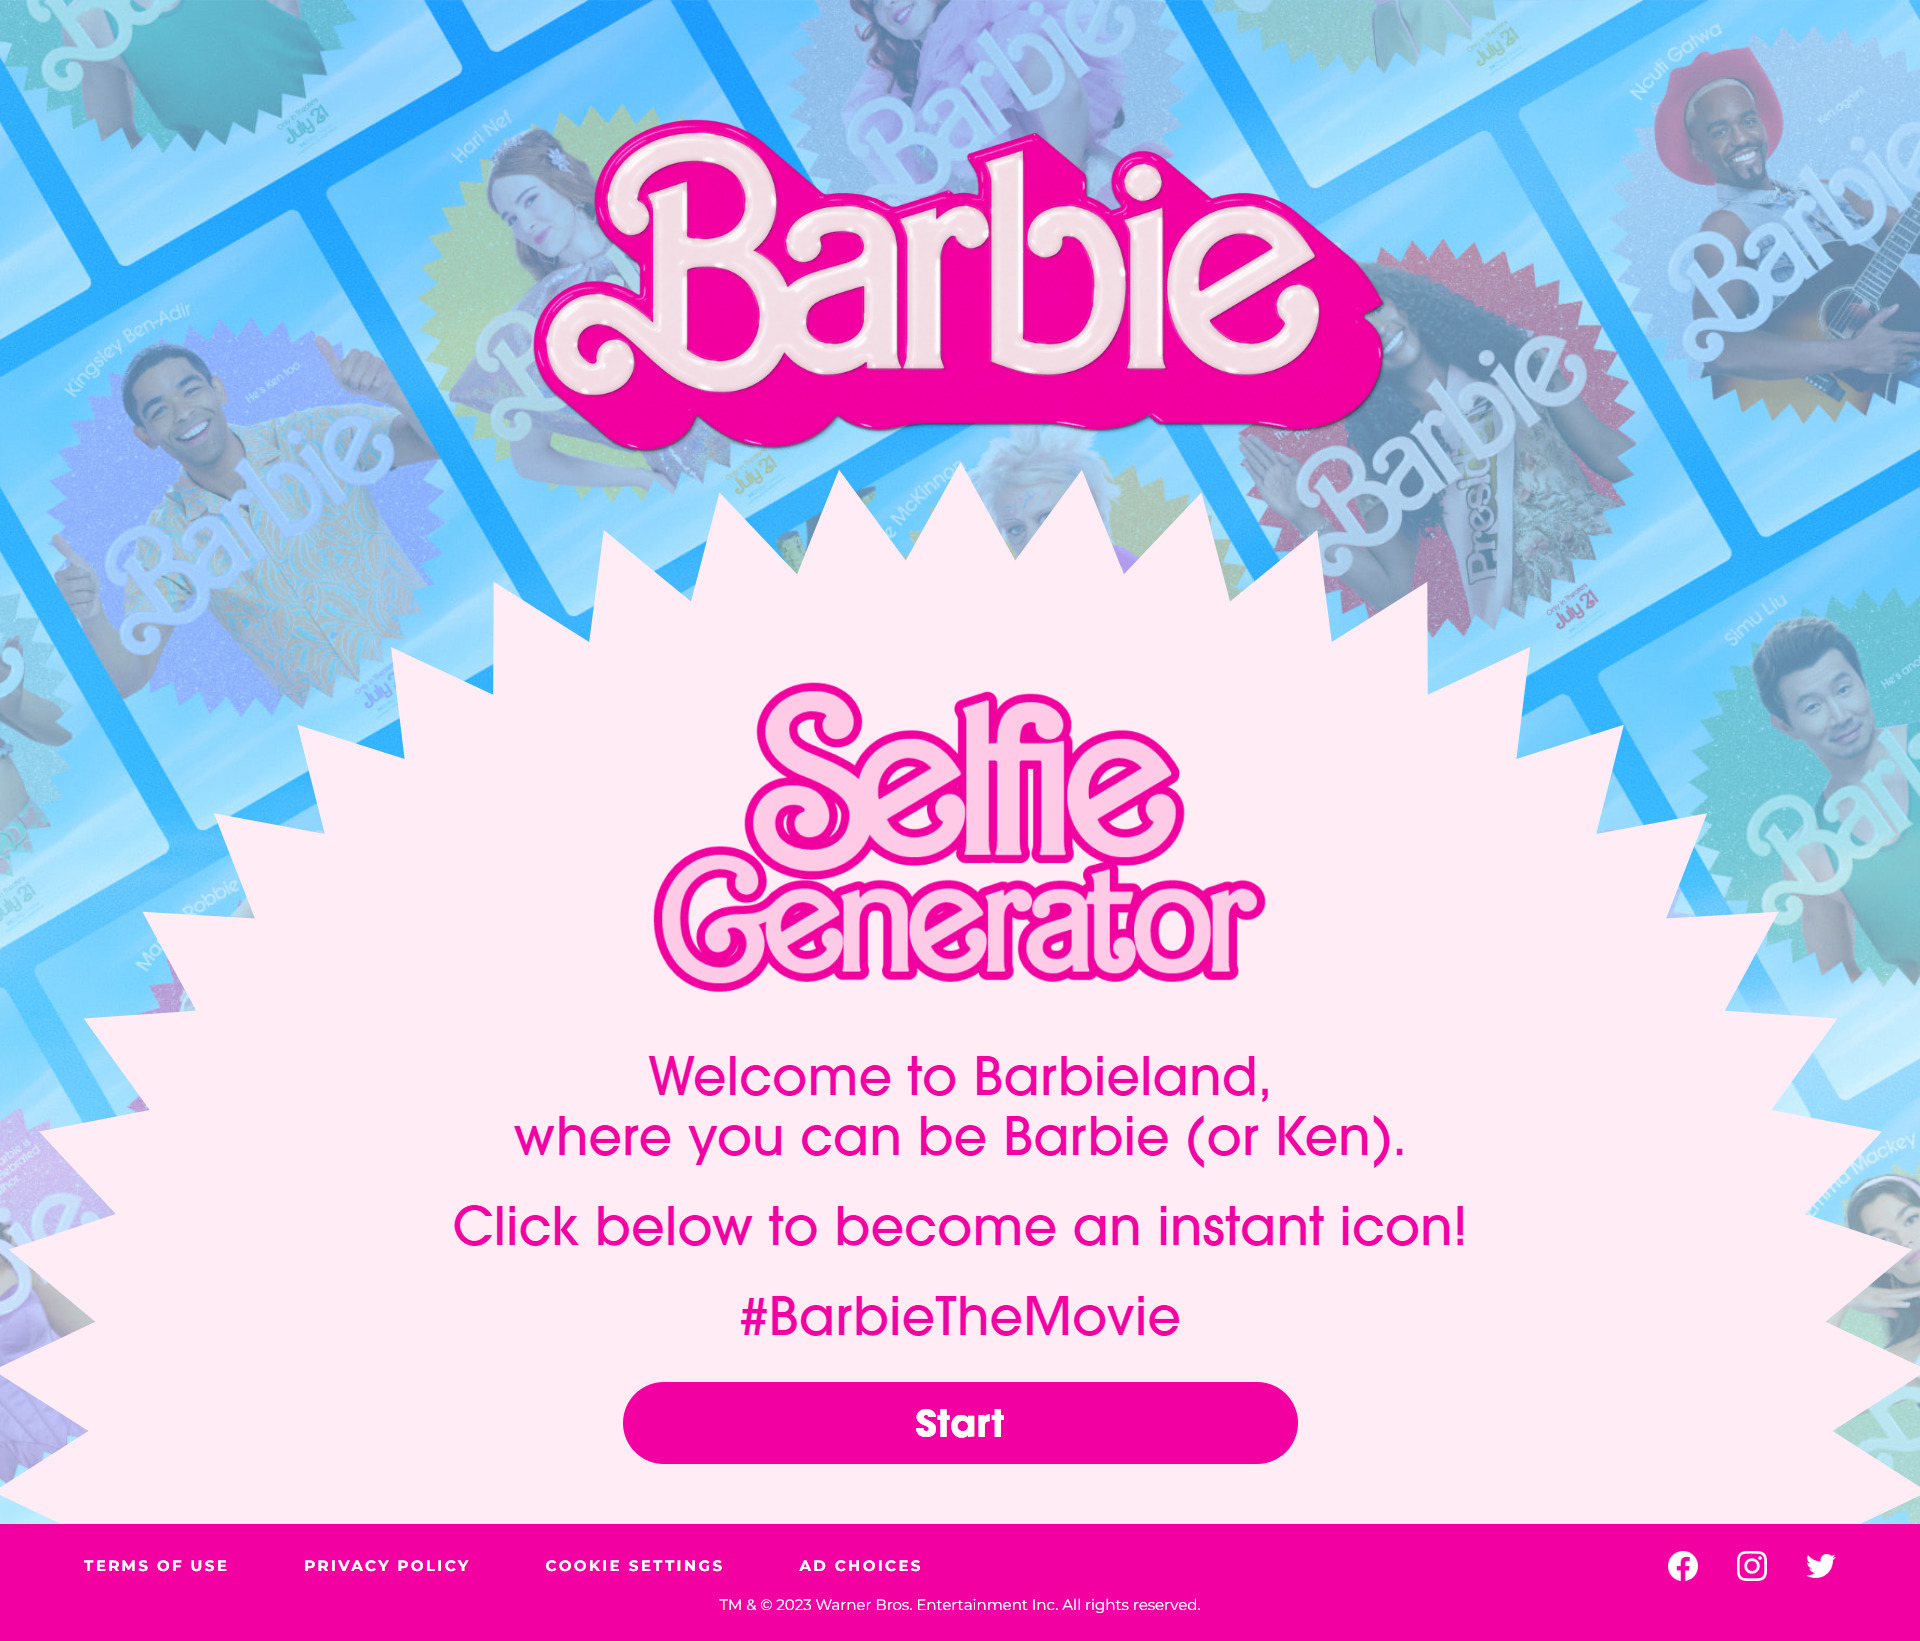 how-to-make-your-own-barbie-poster-barbie-selfie-generator-meme-template